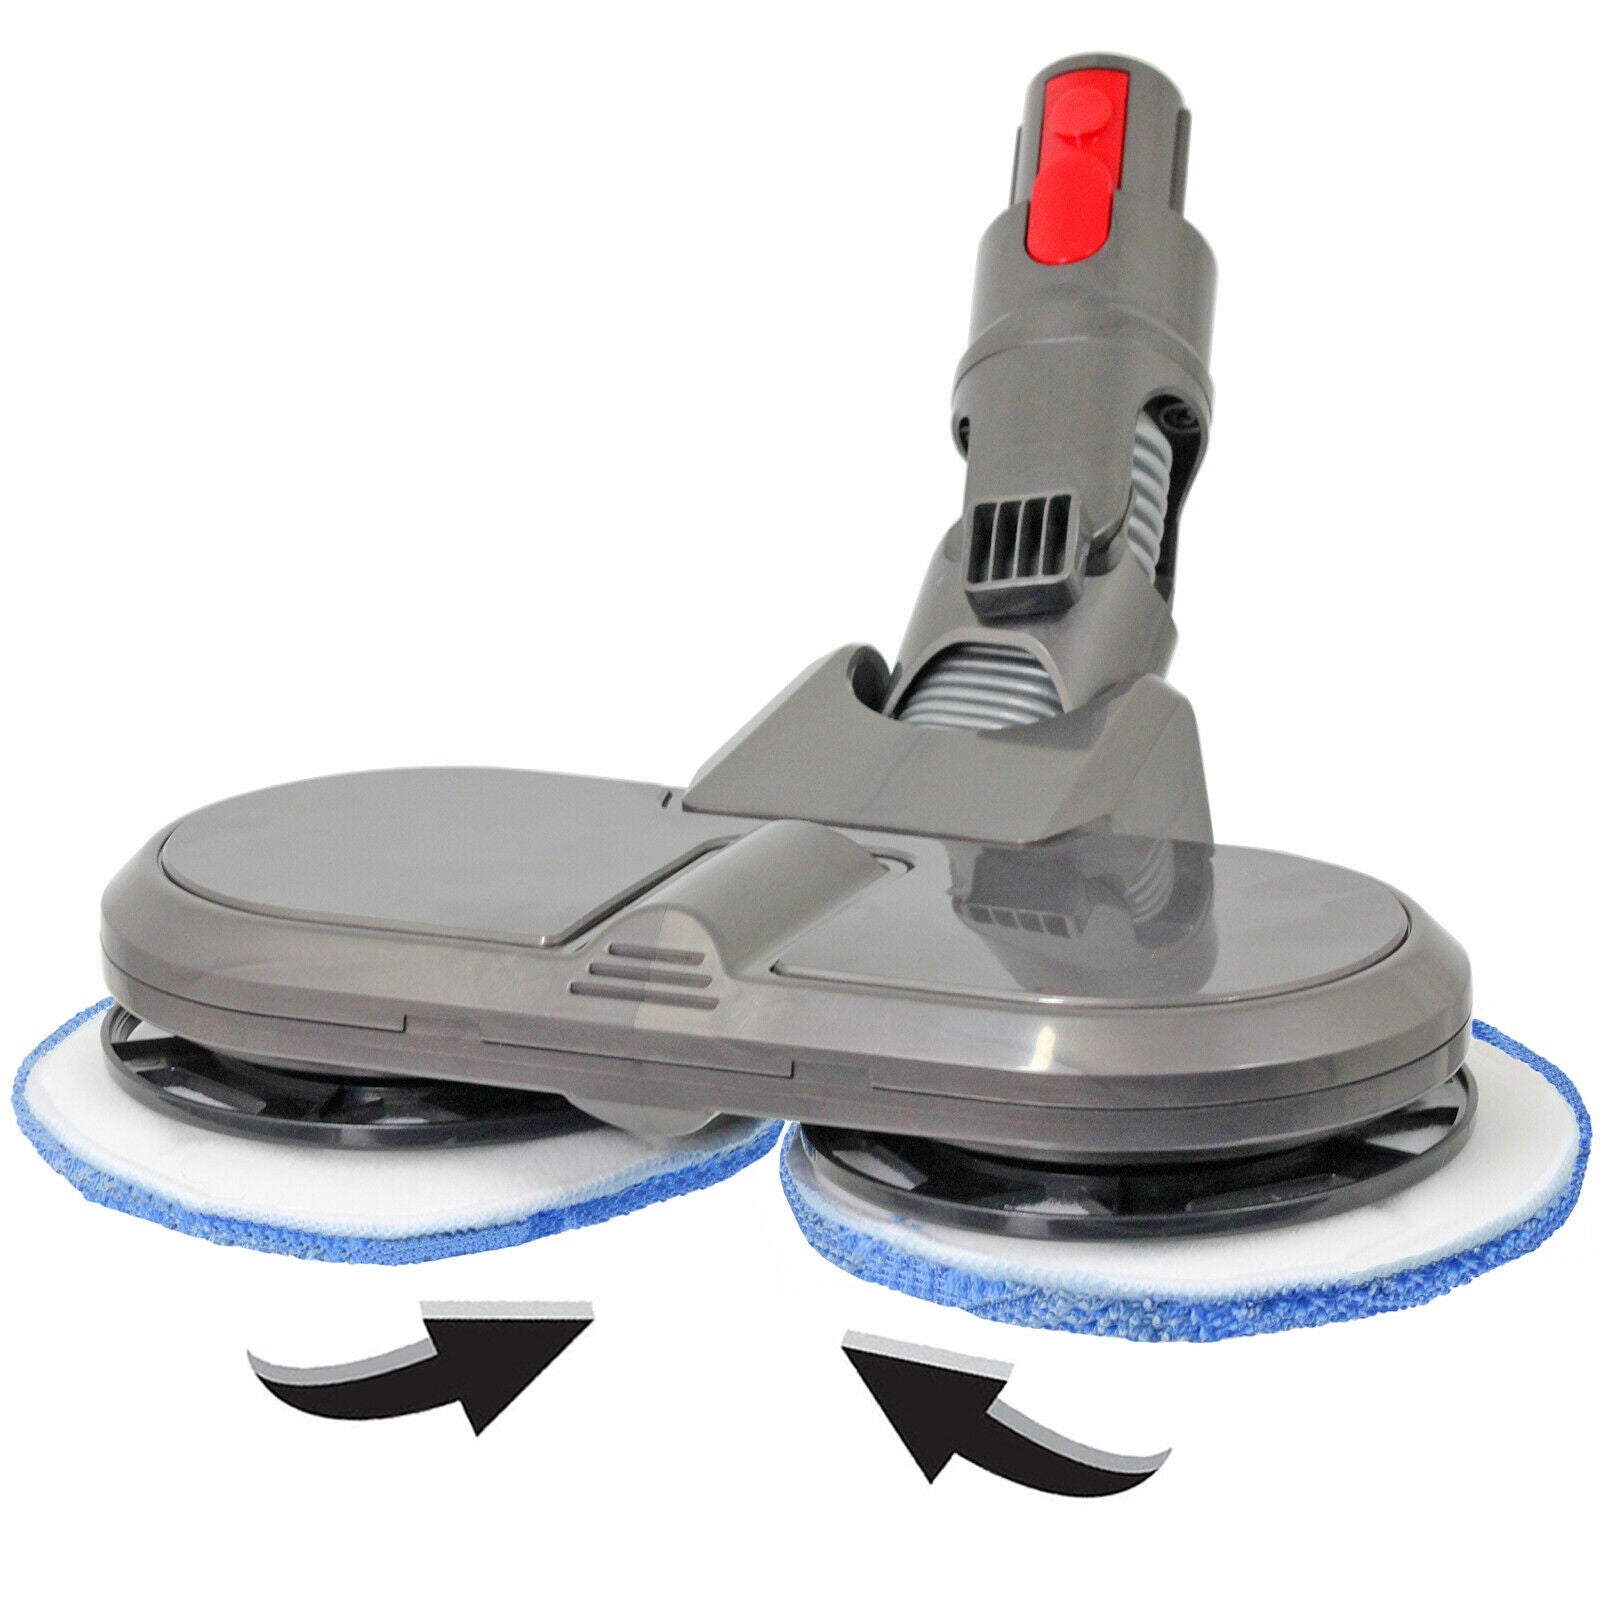 Hard Floor Surface Polisher Scrubbing Cleaning Mop Tool for Dyson V8 SV10 Vacuum Cleaner